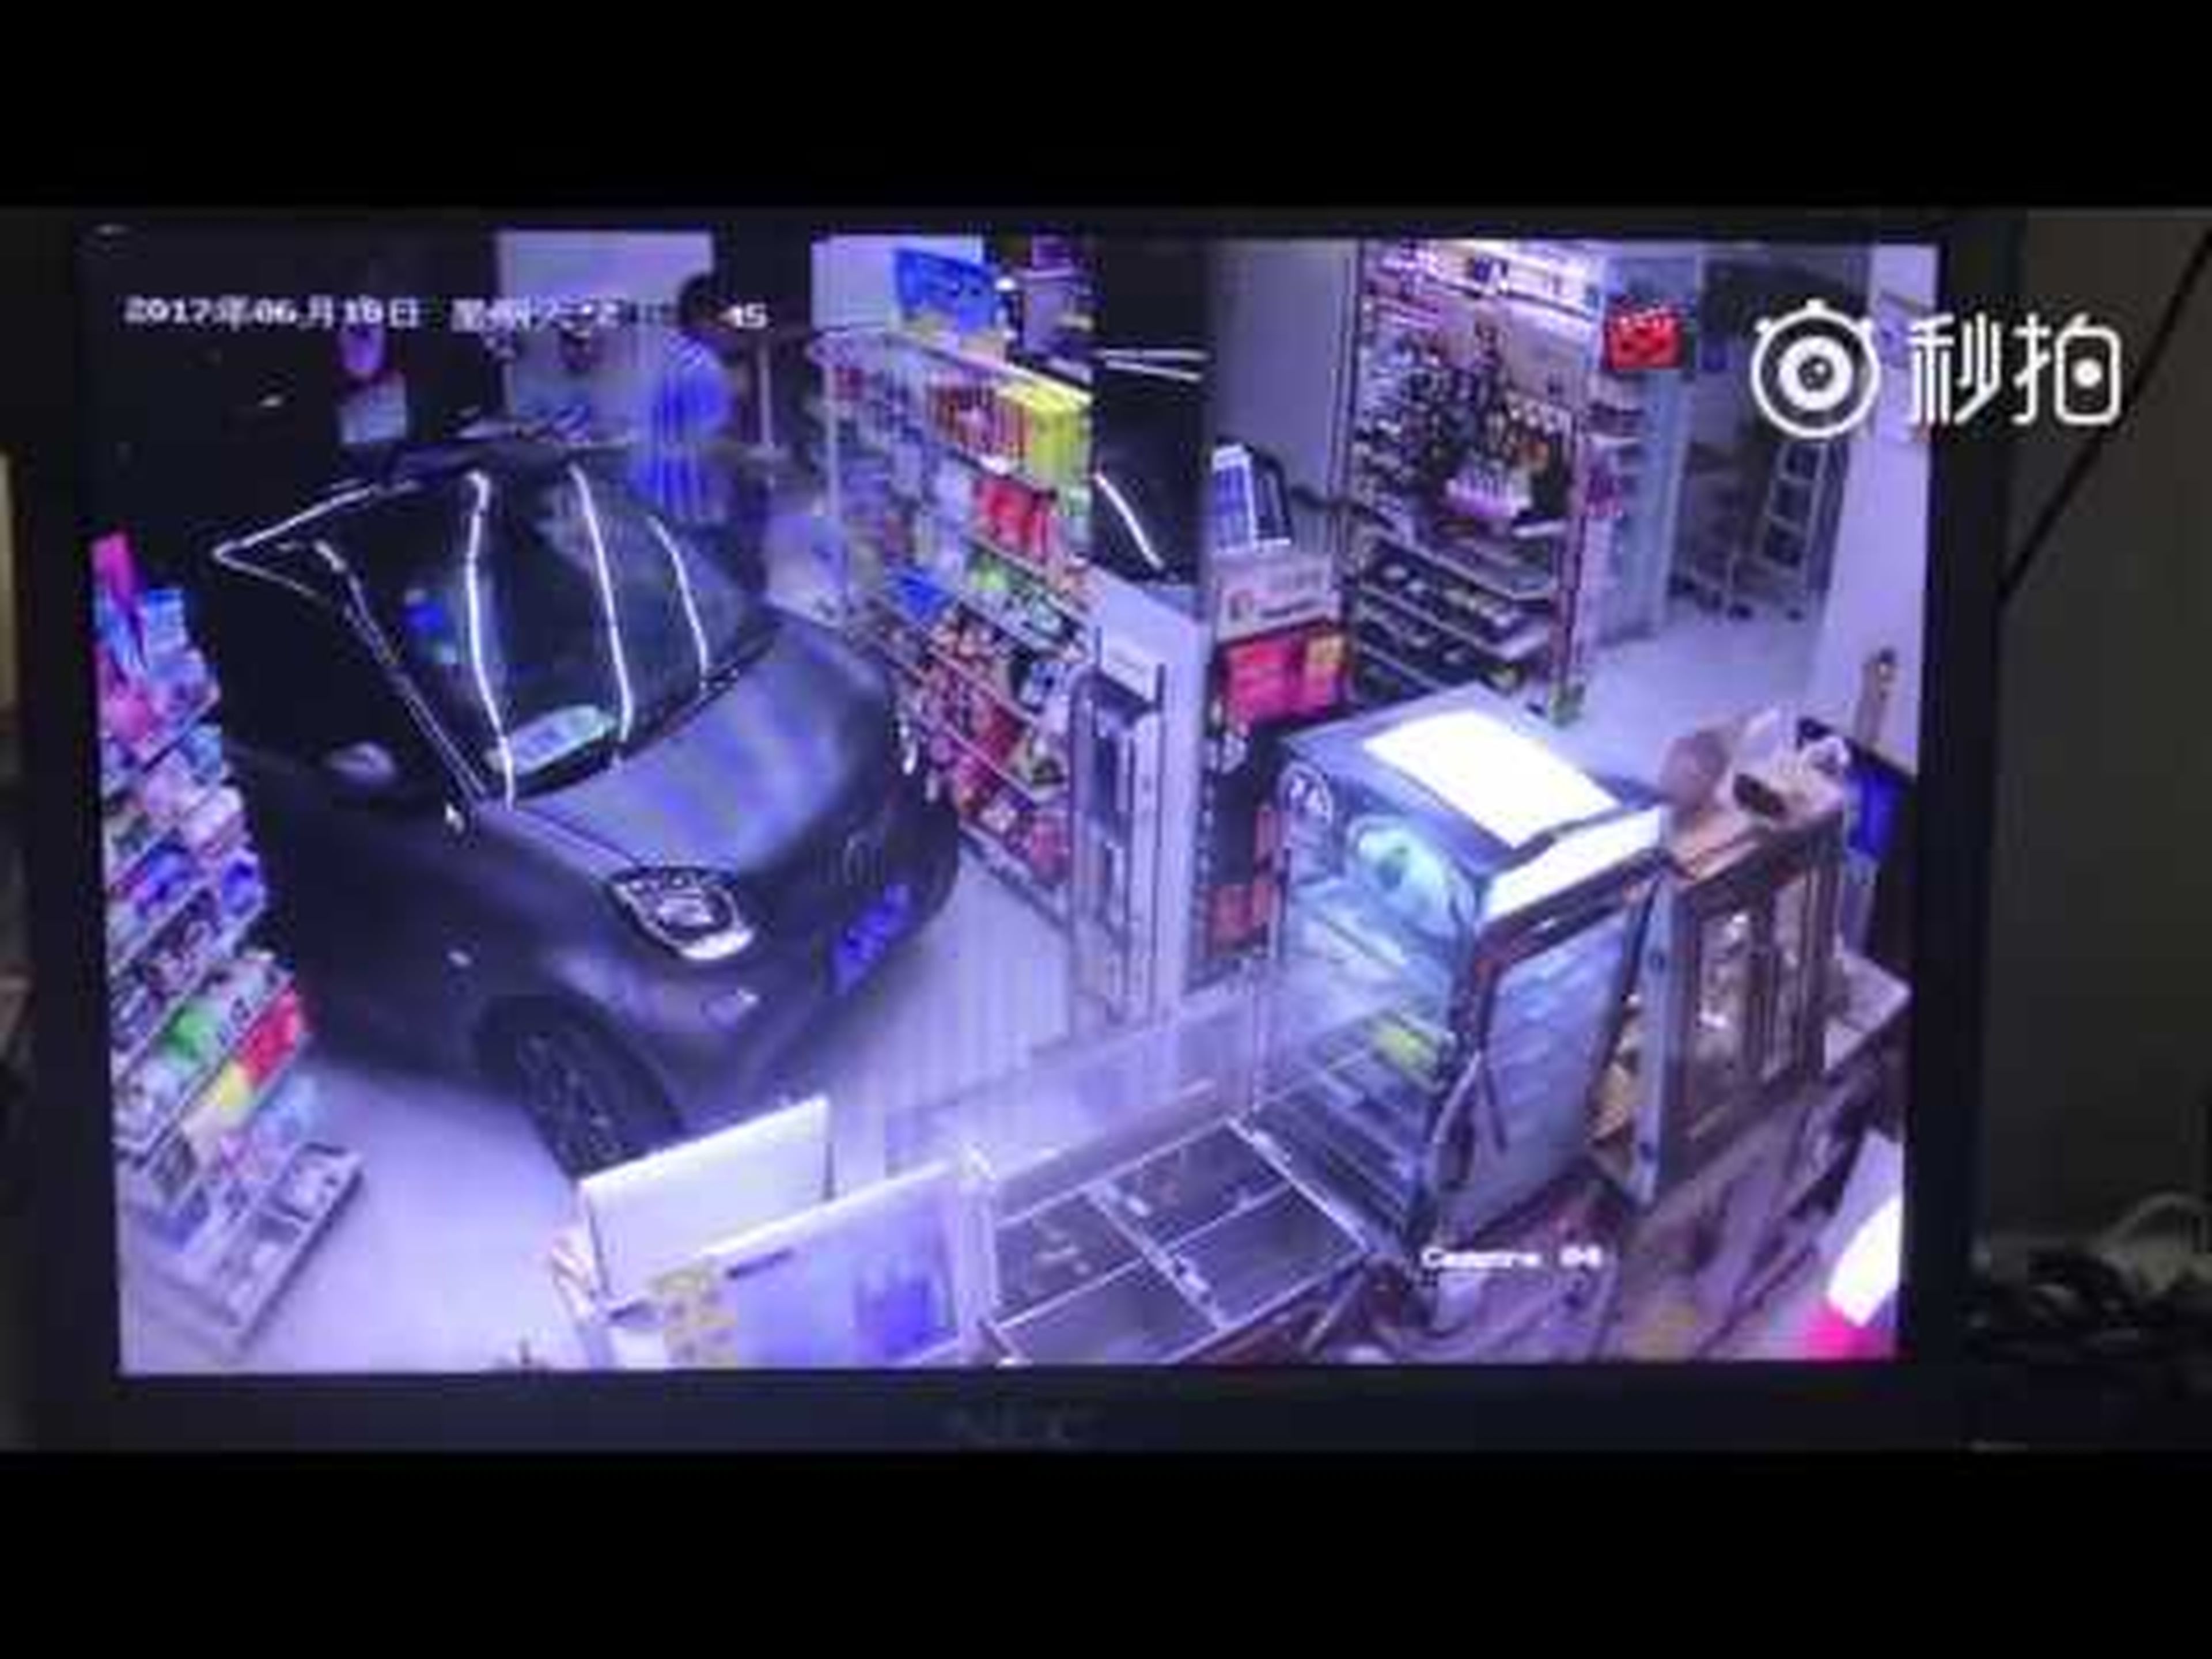 Shocking CCTV footage shows man drove his car into convenience store only to save time from parking